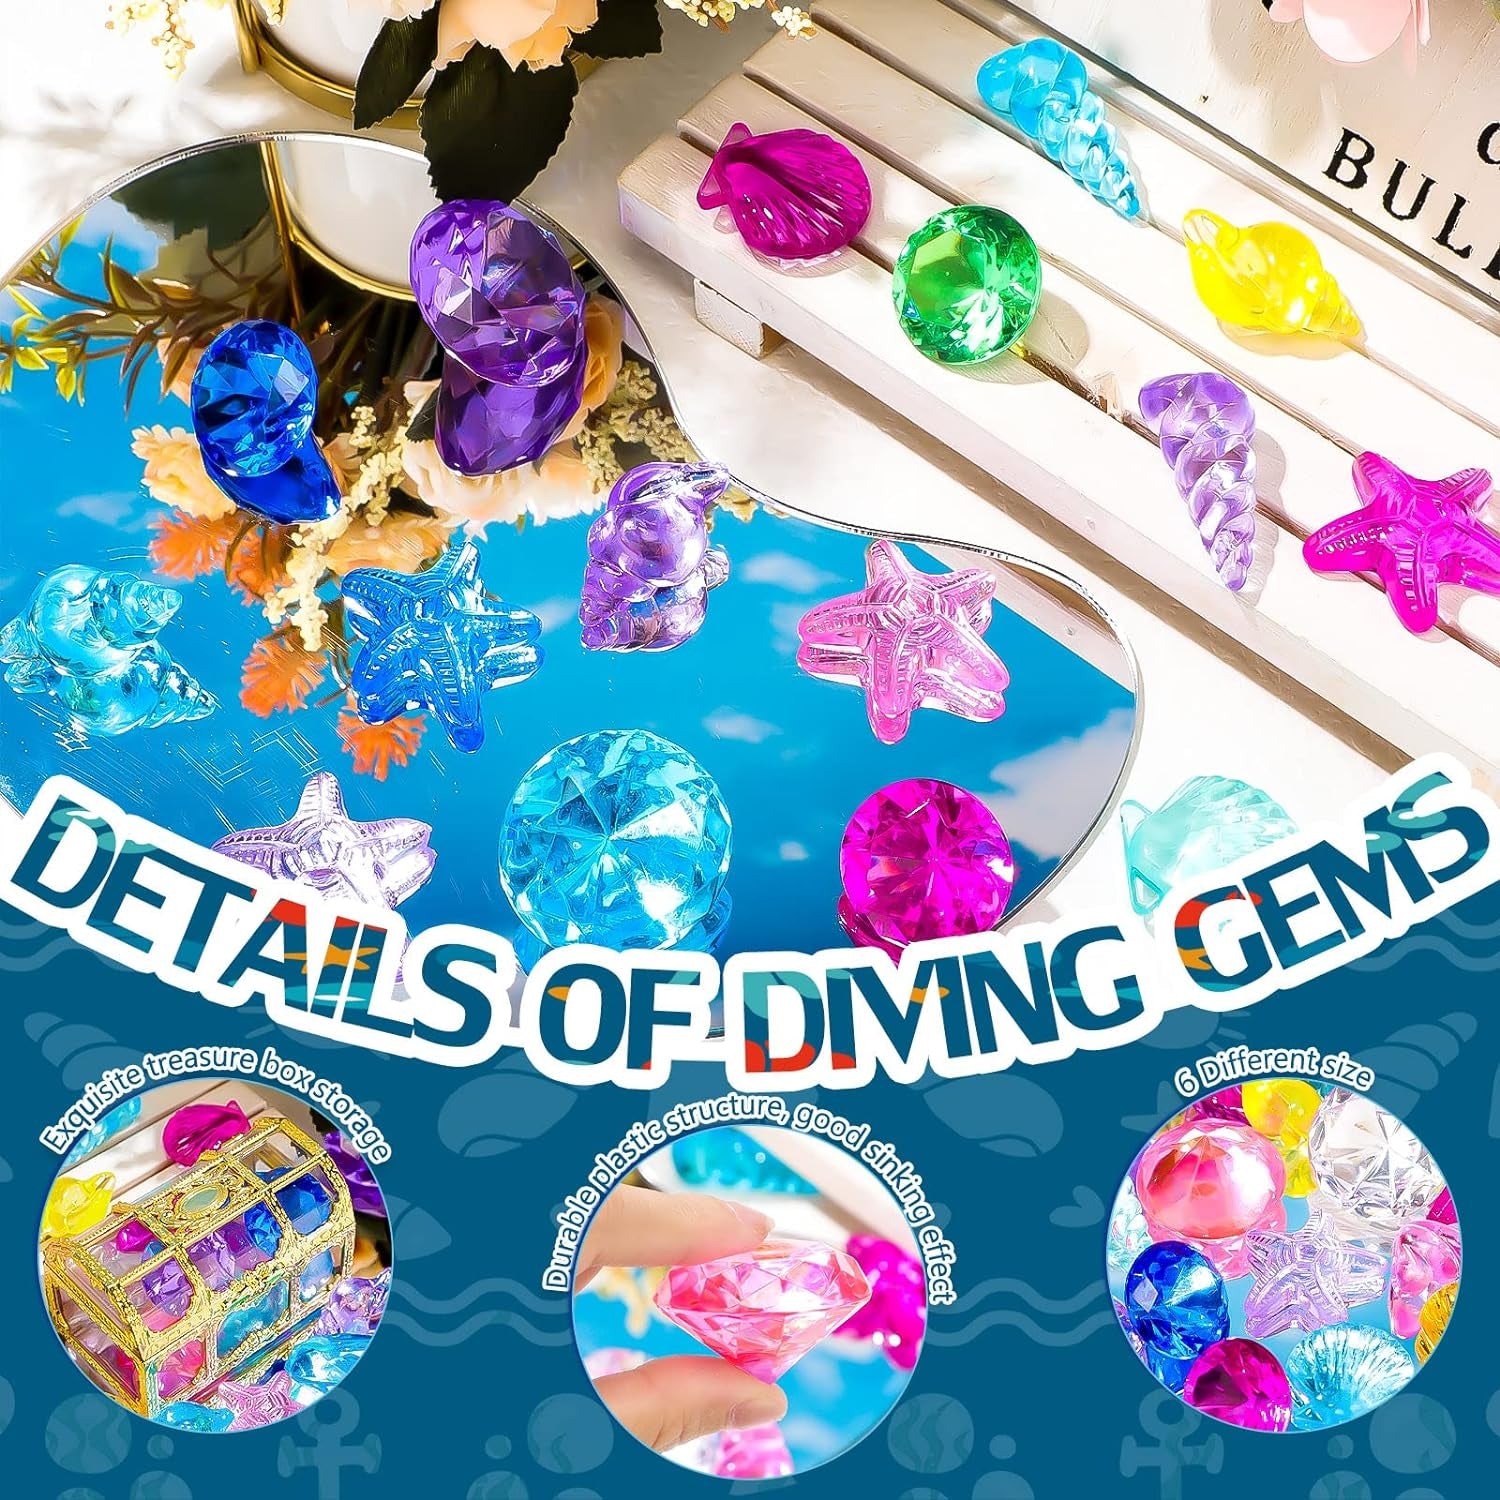 24 Pcs Diving Gems Toys Colorful Mermaid Pool Toys with 2 Treasure Pirate Boxes Summer Treasure Toys Set for Girls Underwater Swimming Birthday Prizes Decoration(Ocean Style)